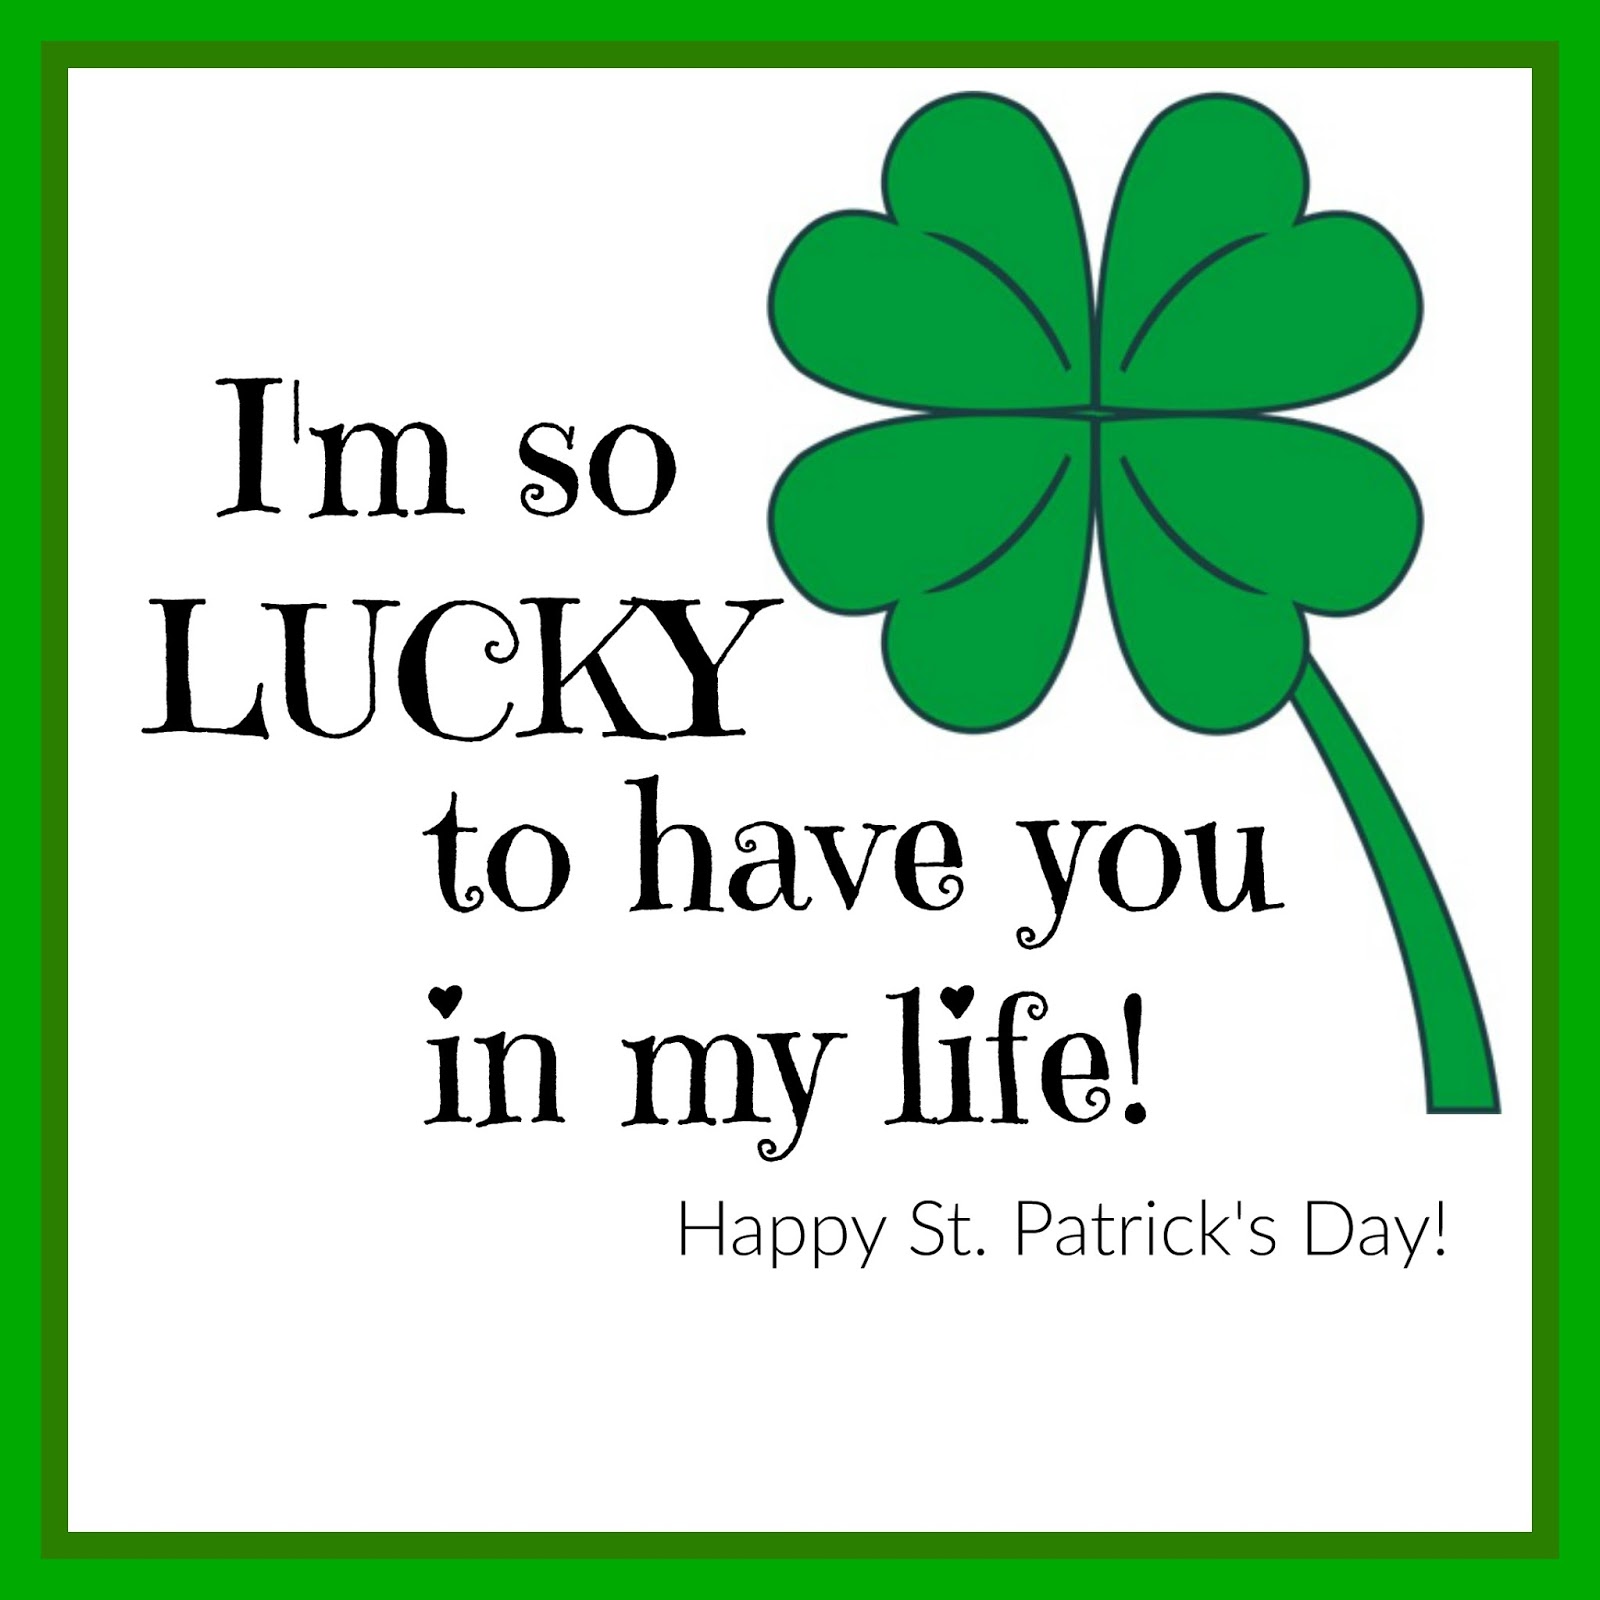 michelle paige blogs: St. Patrick's Day Favors with Printable Tags